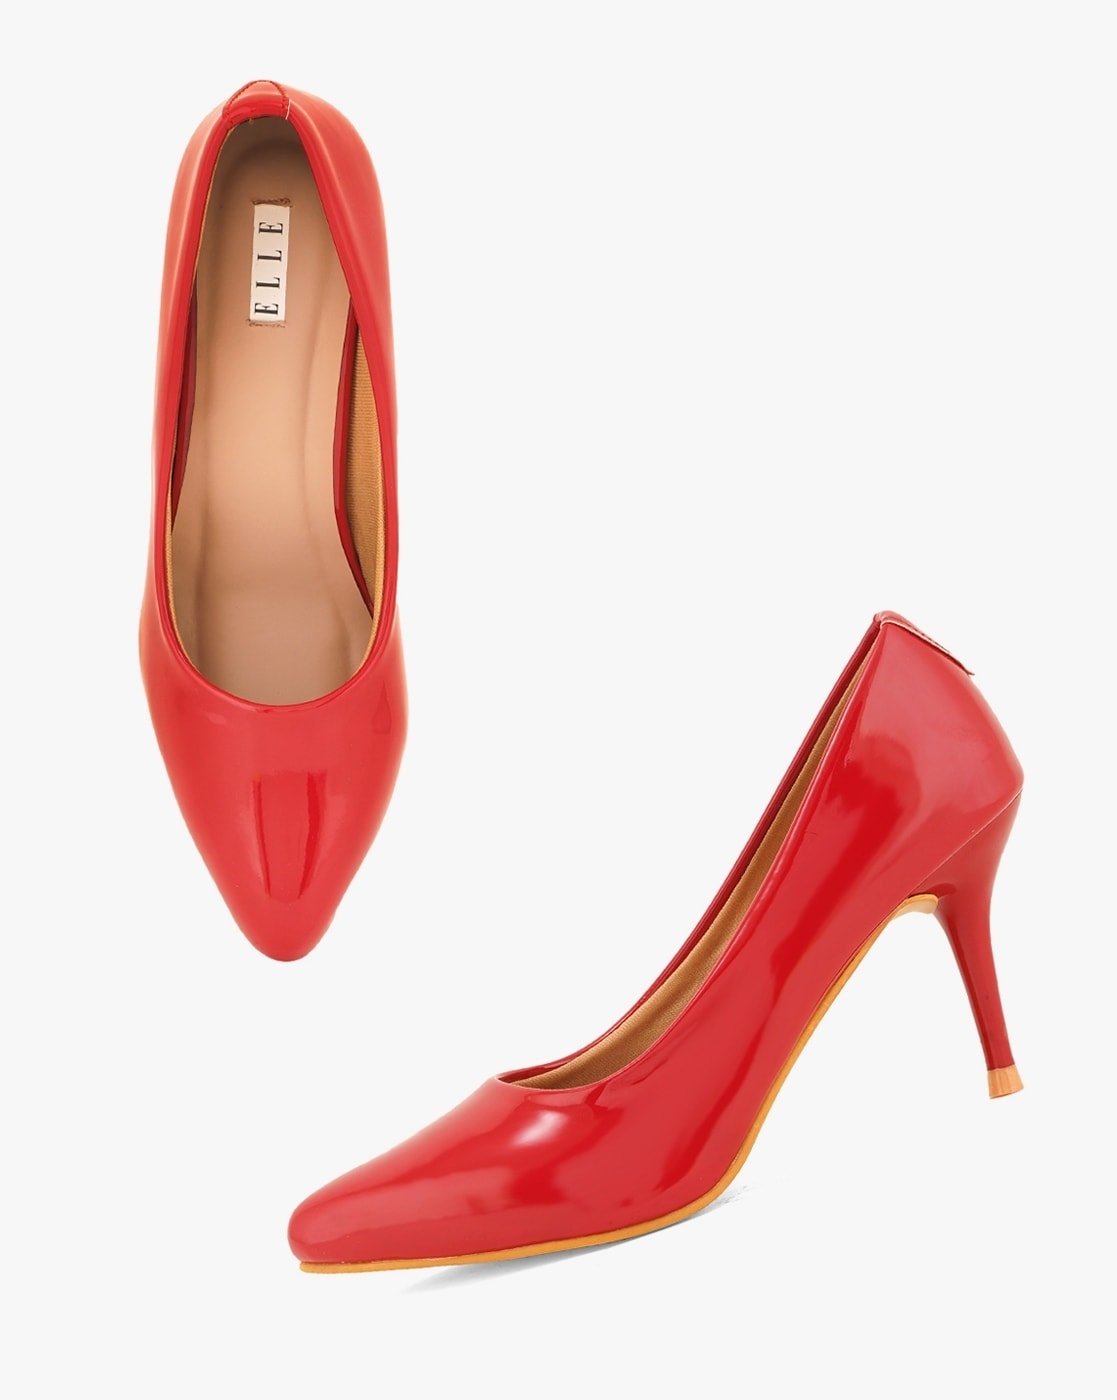 ASOS DESIGN Wide Fit Sienna mid heeled pumps in red | ASOS